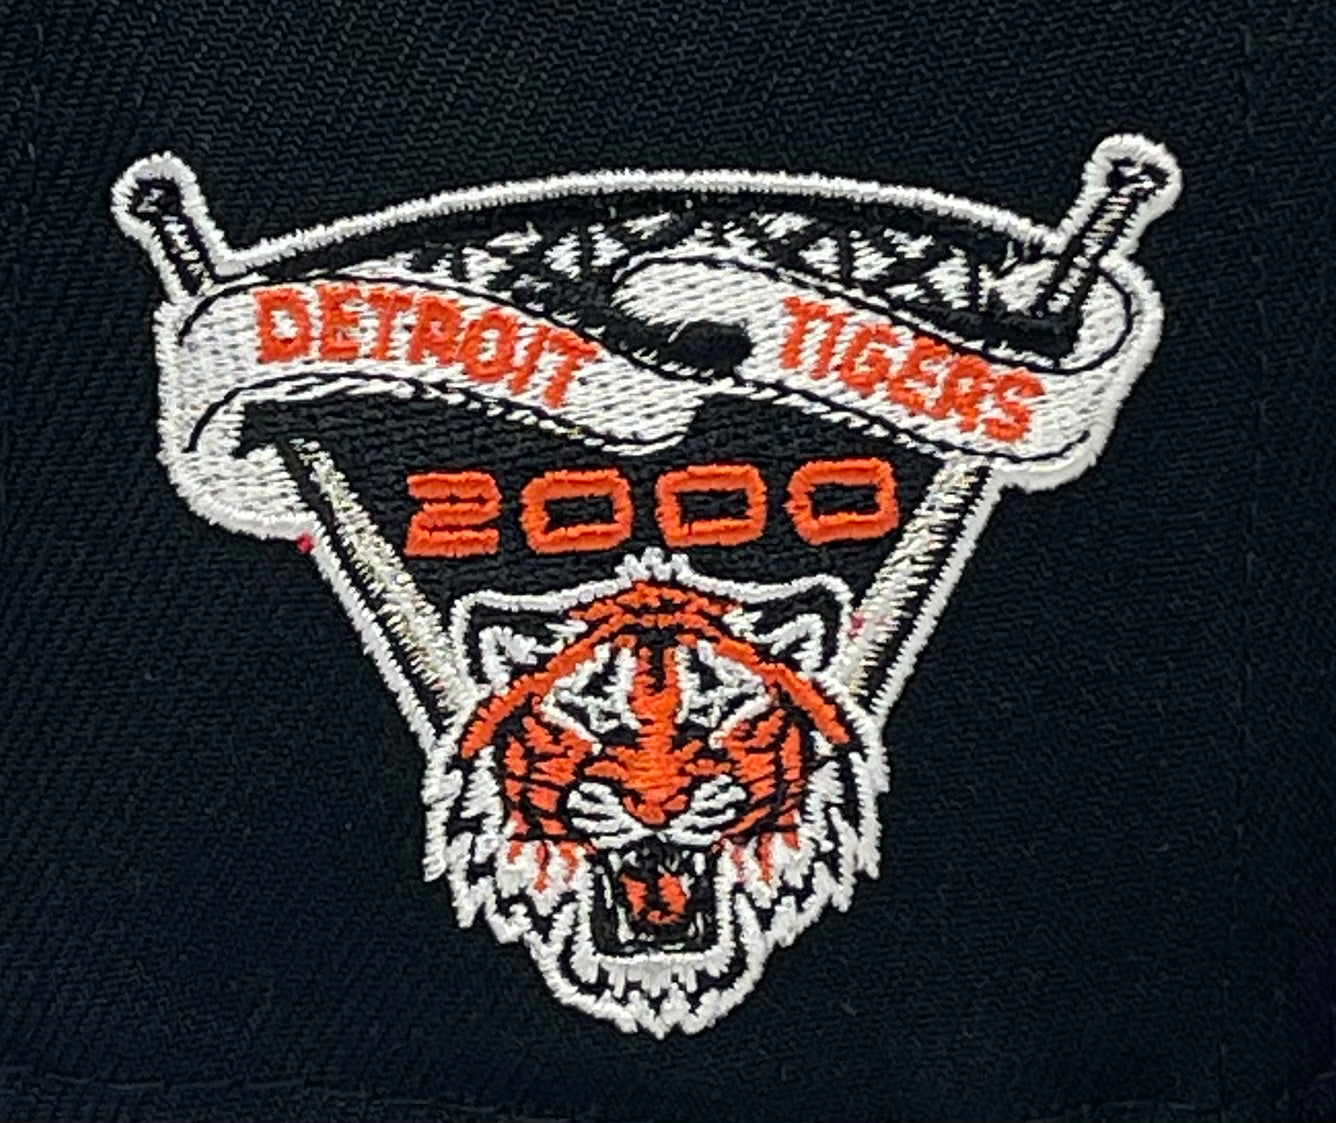 DETROIT TIGERS (BLACK) (2000) NEW ERA 59FIFTY FITTED